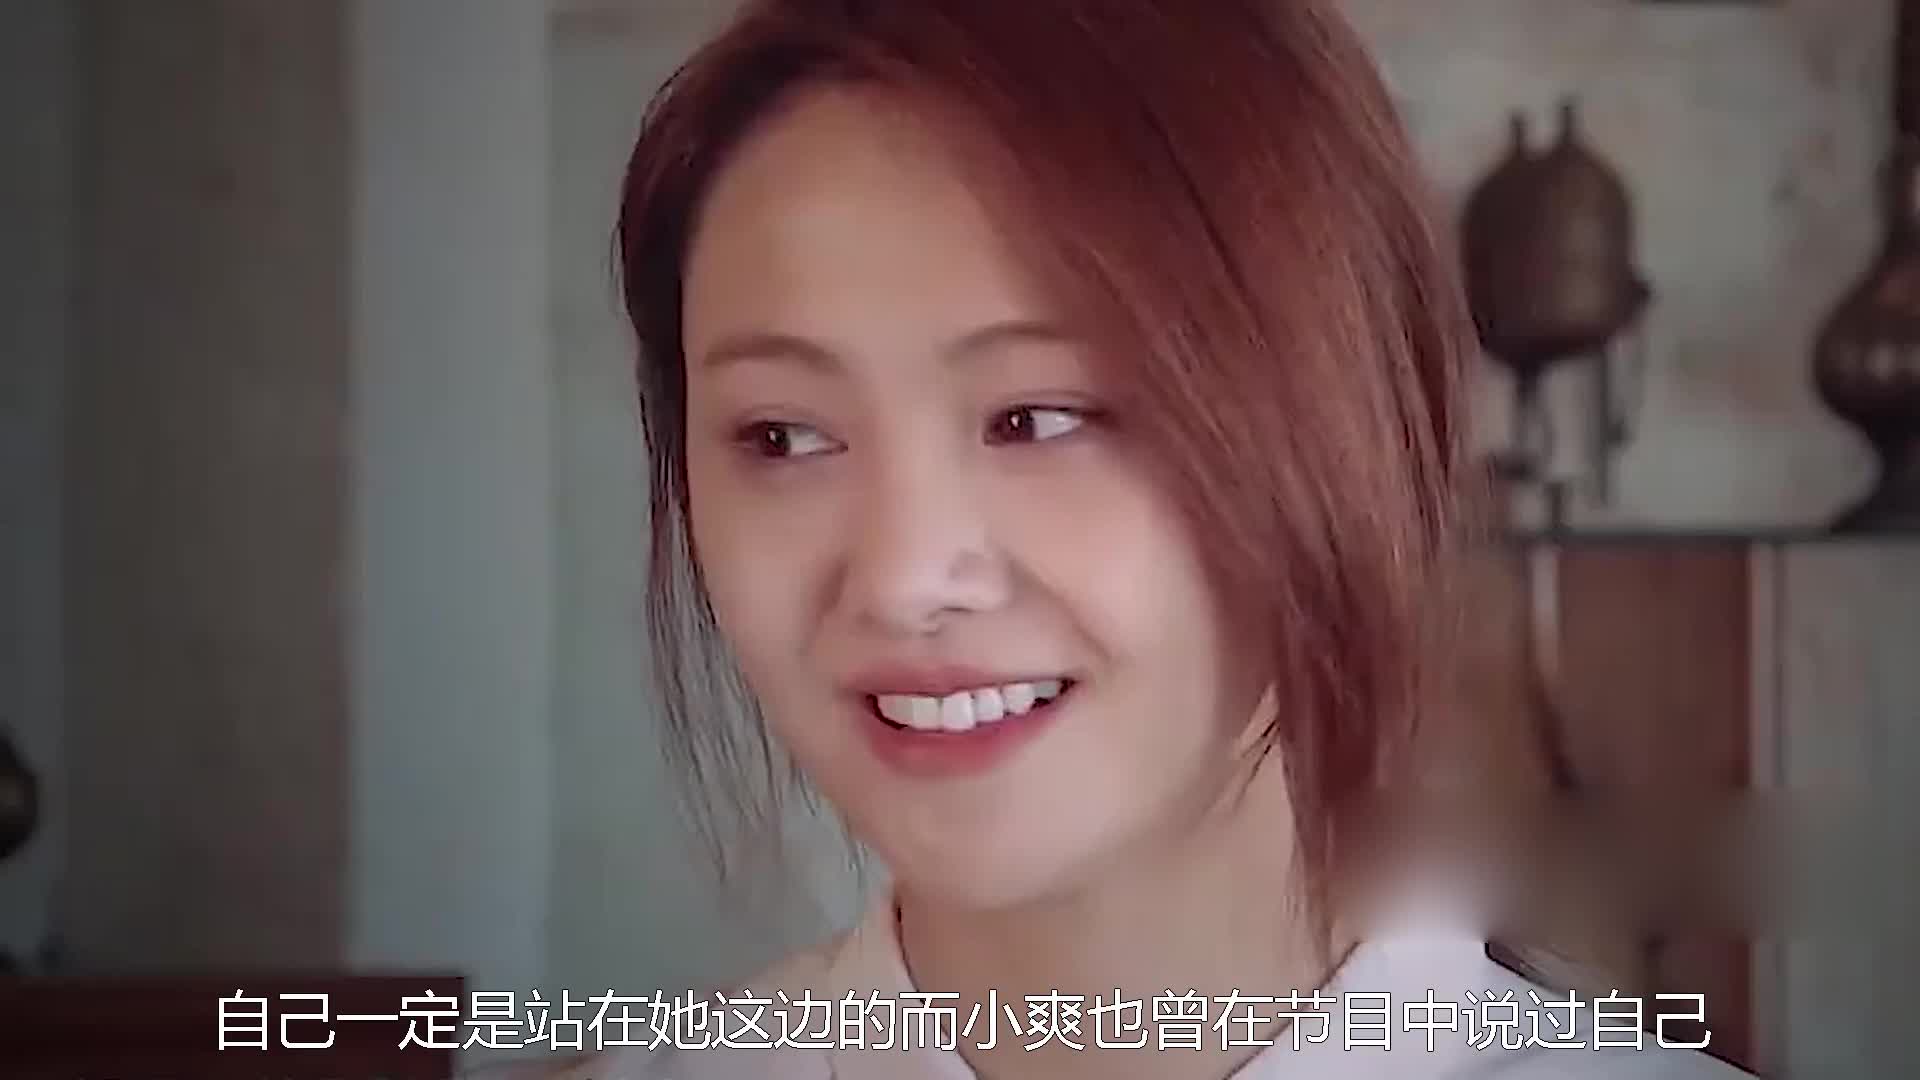 Zheng Shuang said that it was to see Tianyu that he appeared on the show. Ma Tianyu's reaction was so spoiled that Zhang Heng could not sit still.